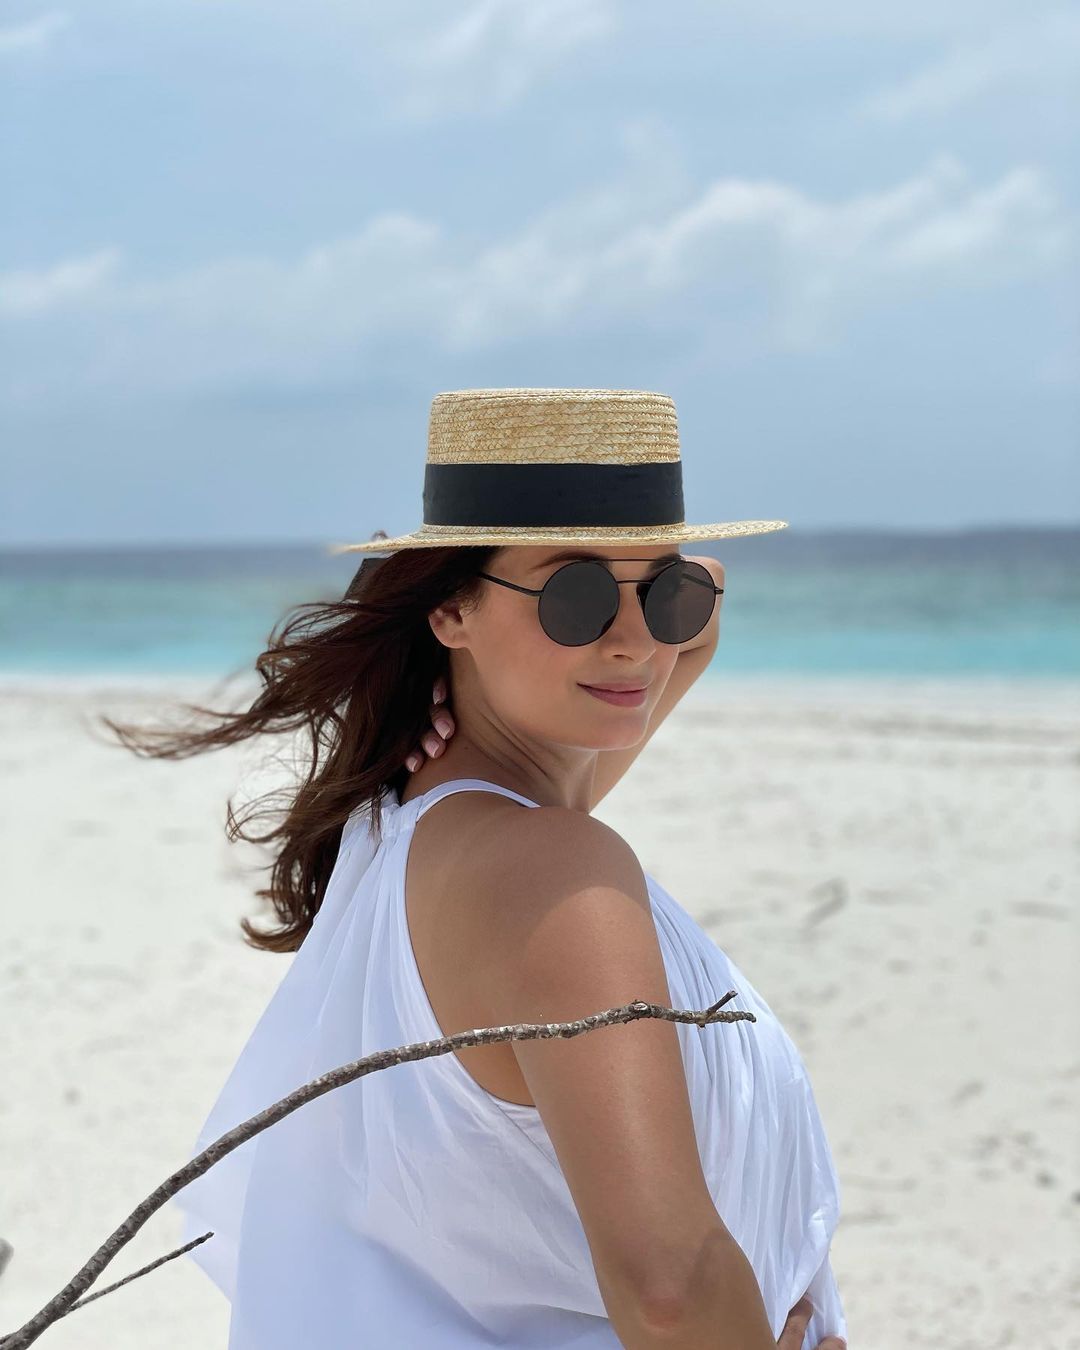  Dia Mirza is giving super chic vibes from the island nation of Maldives. (Image: Instagram)